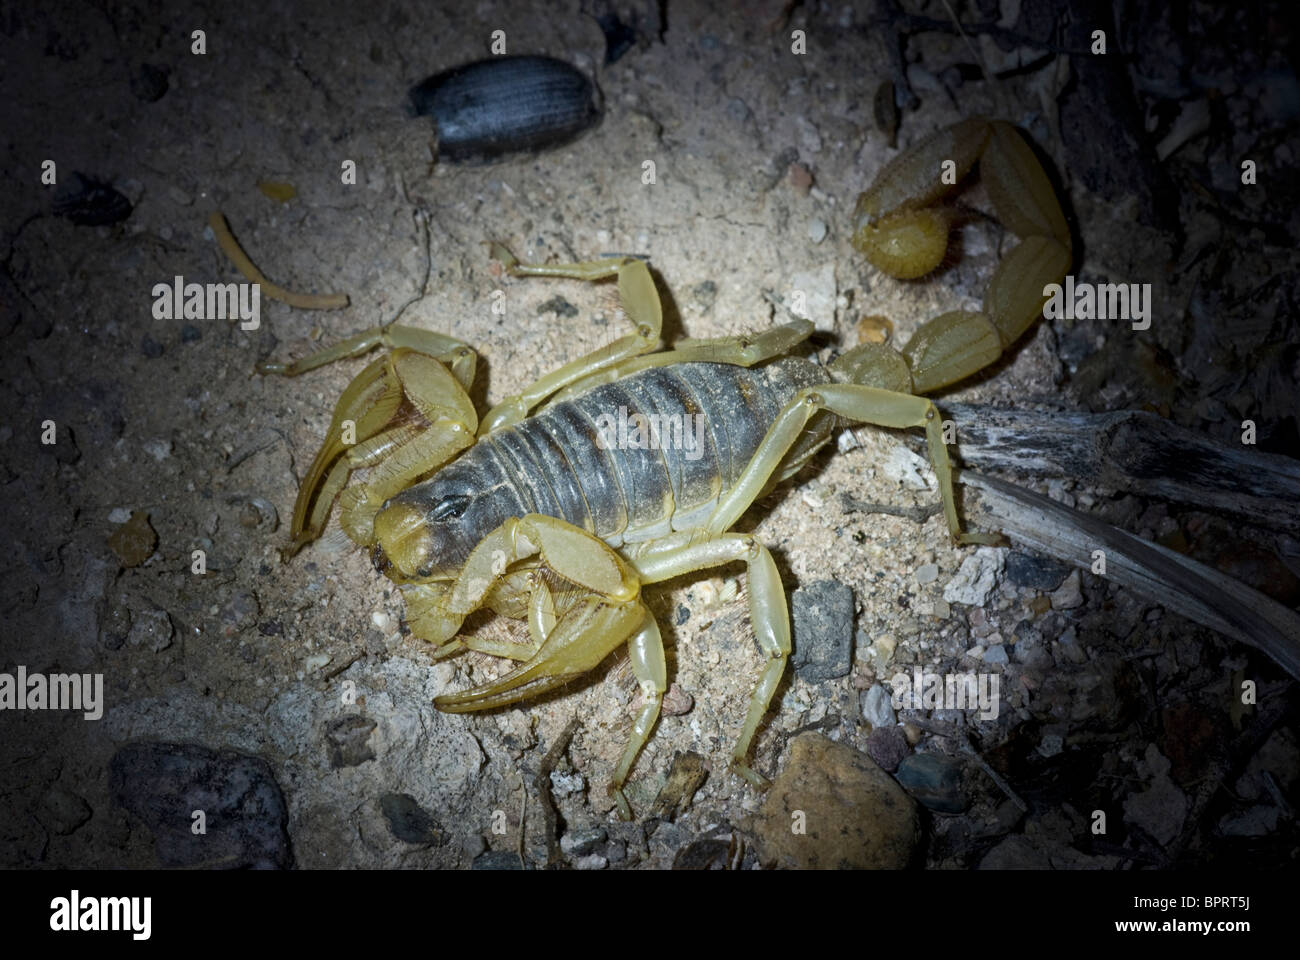 A Giant Desert Hairy Scorpion at night under normal light. Stock Photo